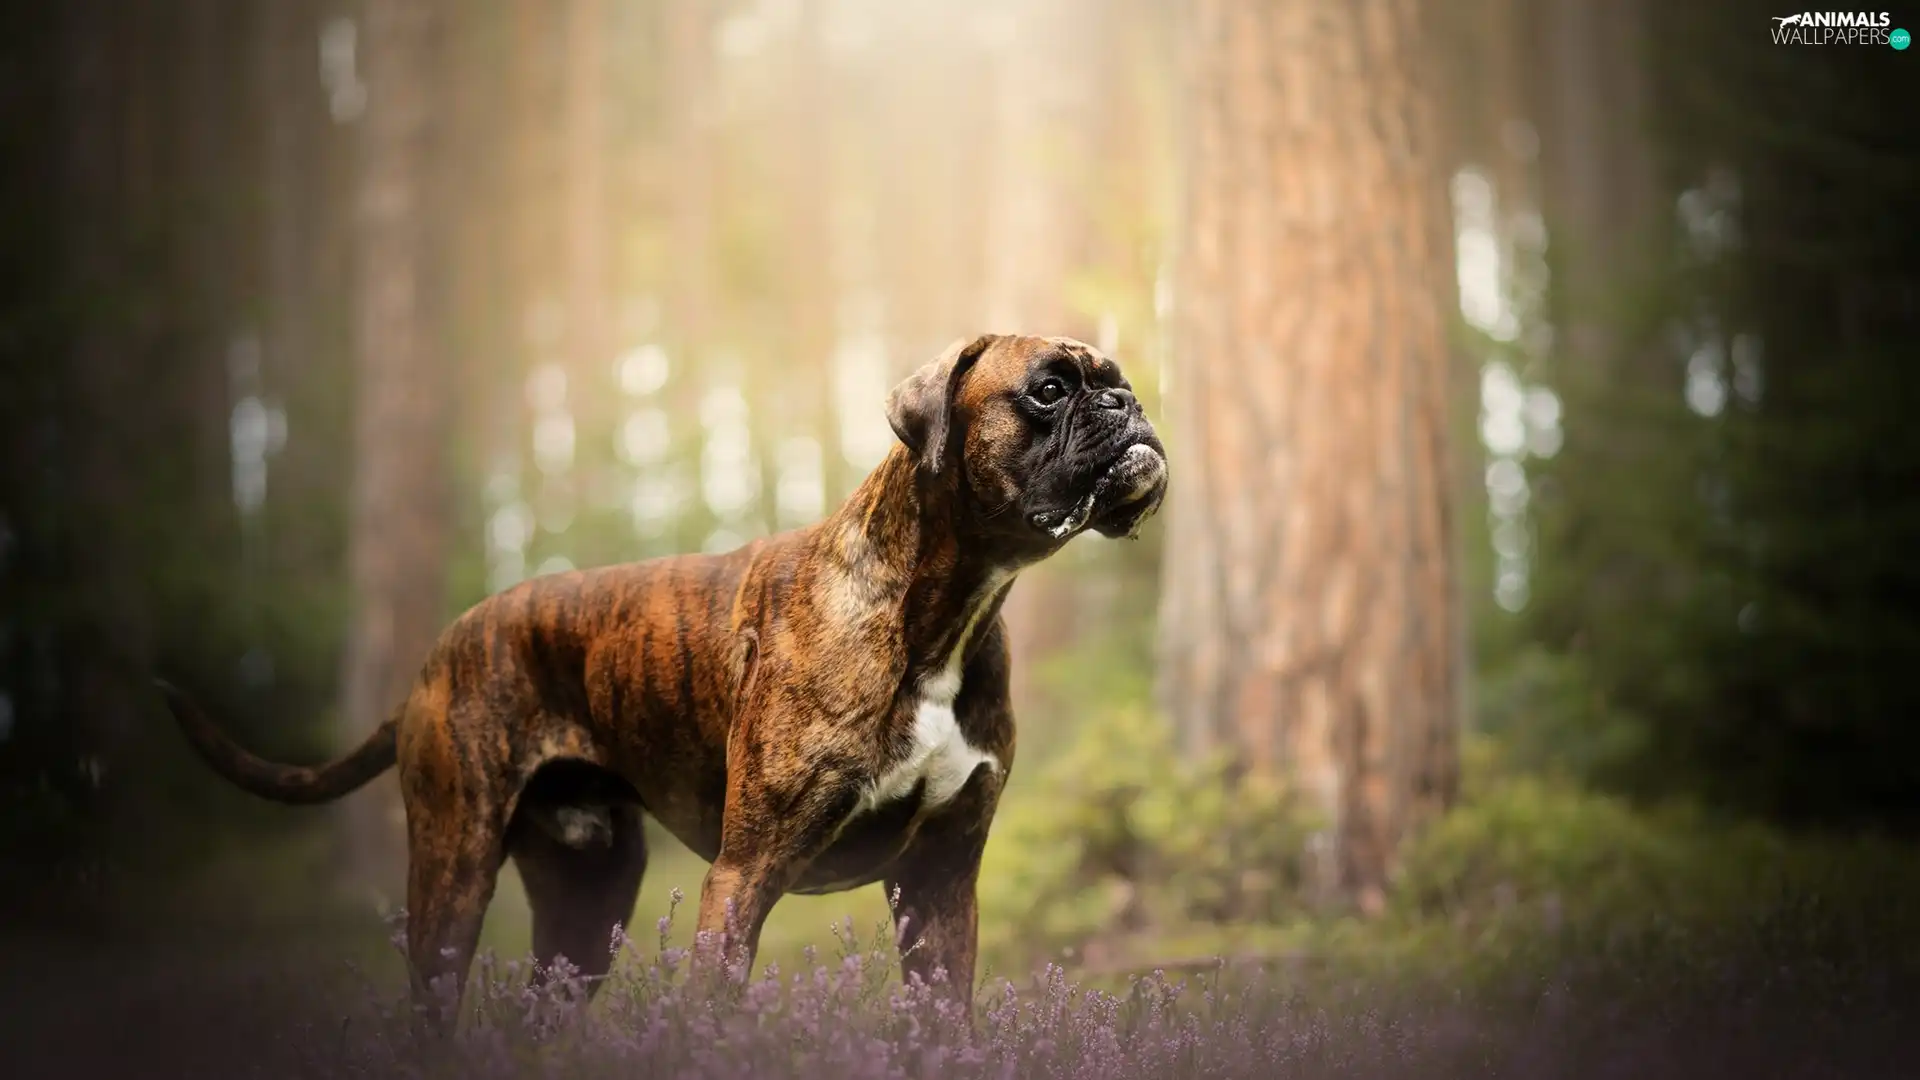 dog, heathers, forest, boxer